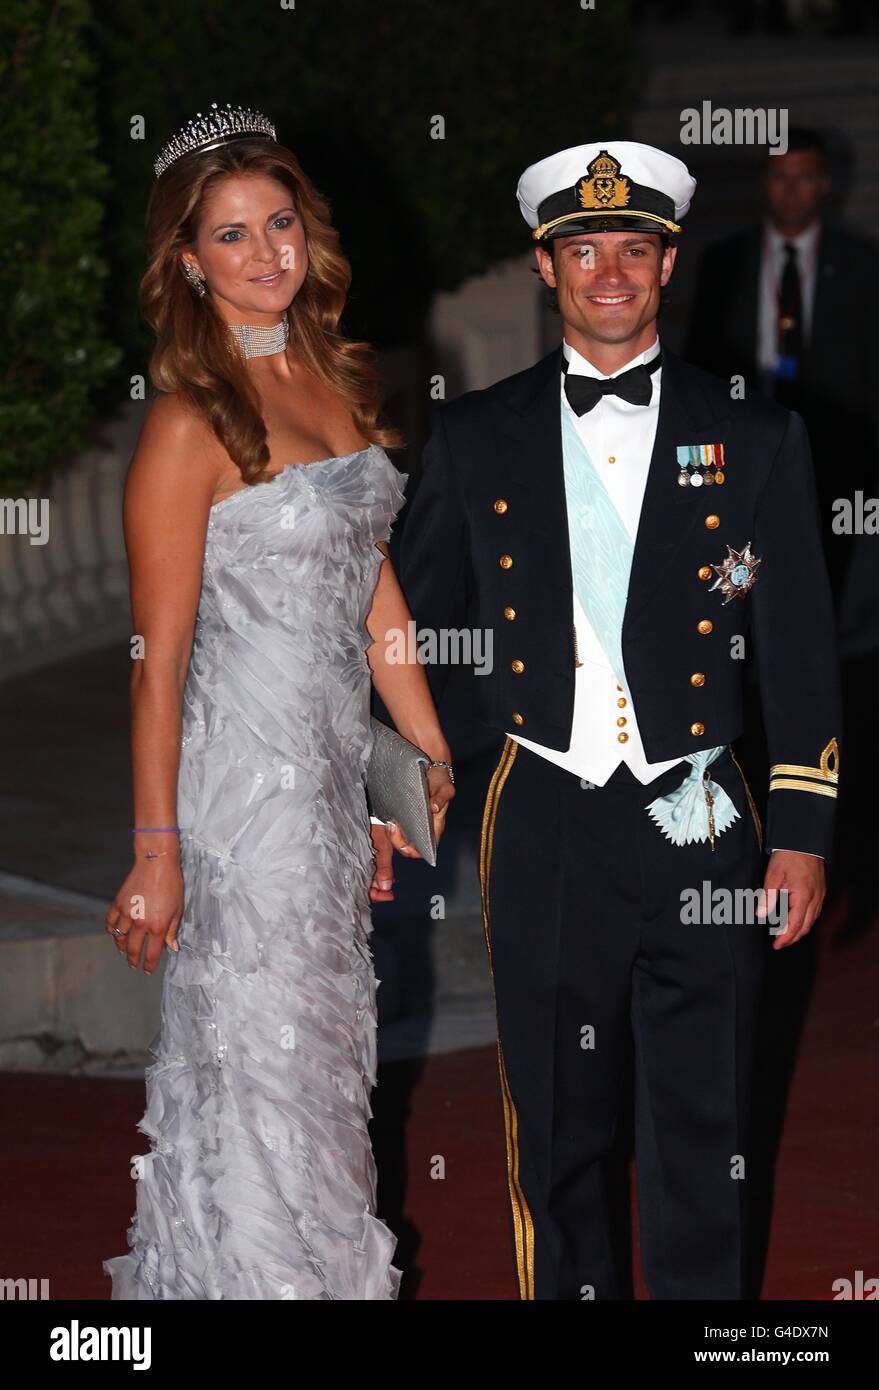 Princess Madeleine of Sweden and Prince Carl Philip of Sweden arriving for the official dinner for Prince Albert II of Monaco and Charlene Wittstock at the Monte Carlo Opera House. Stock Photo